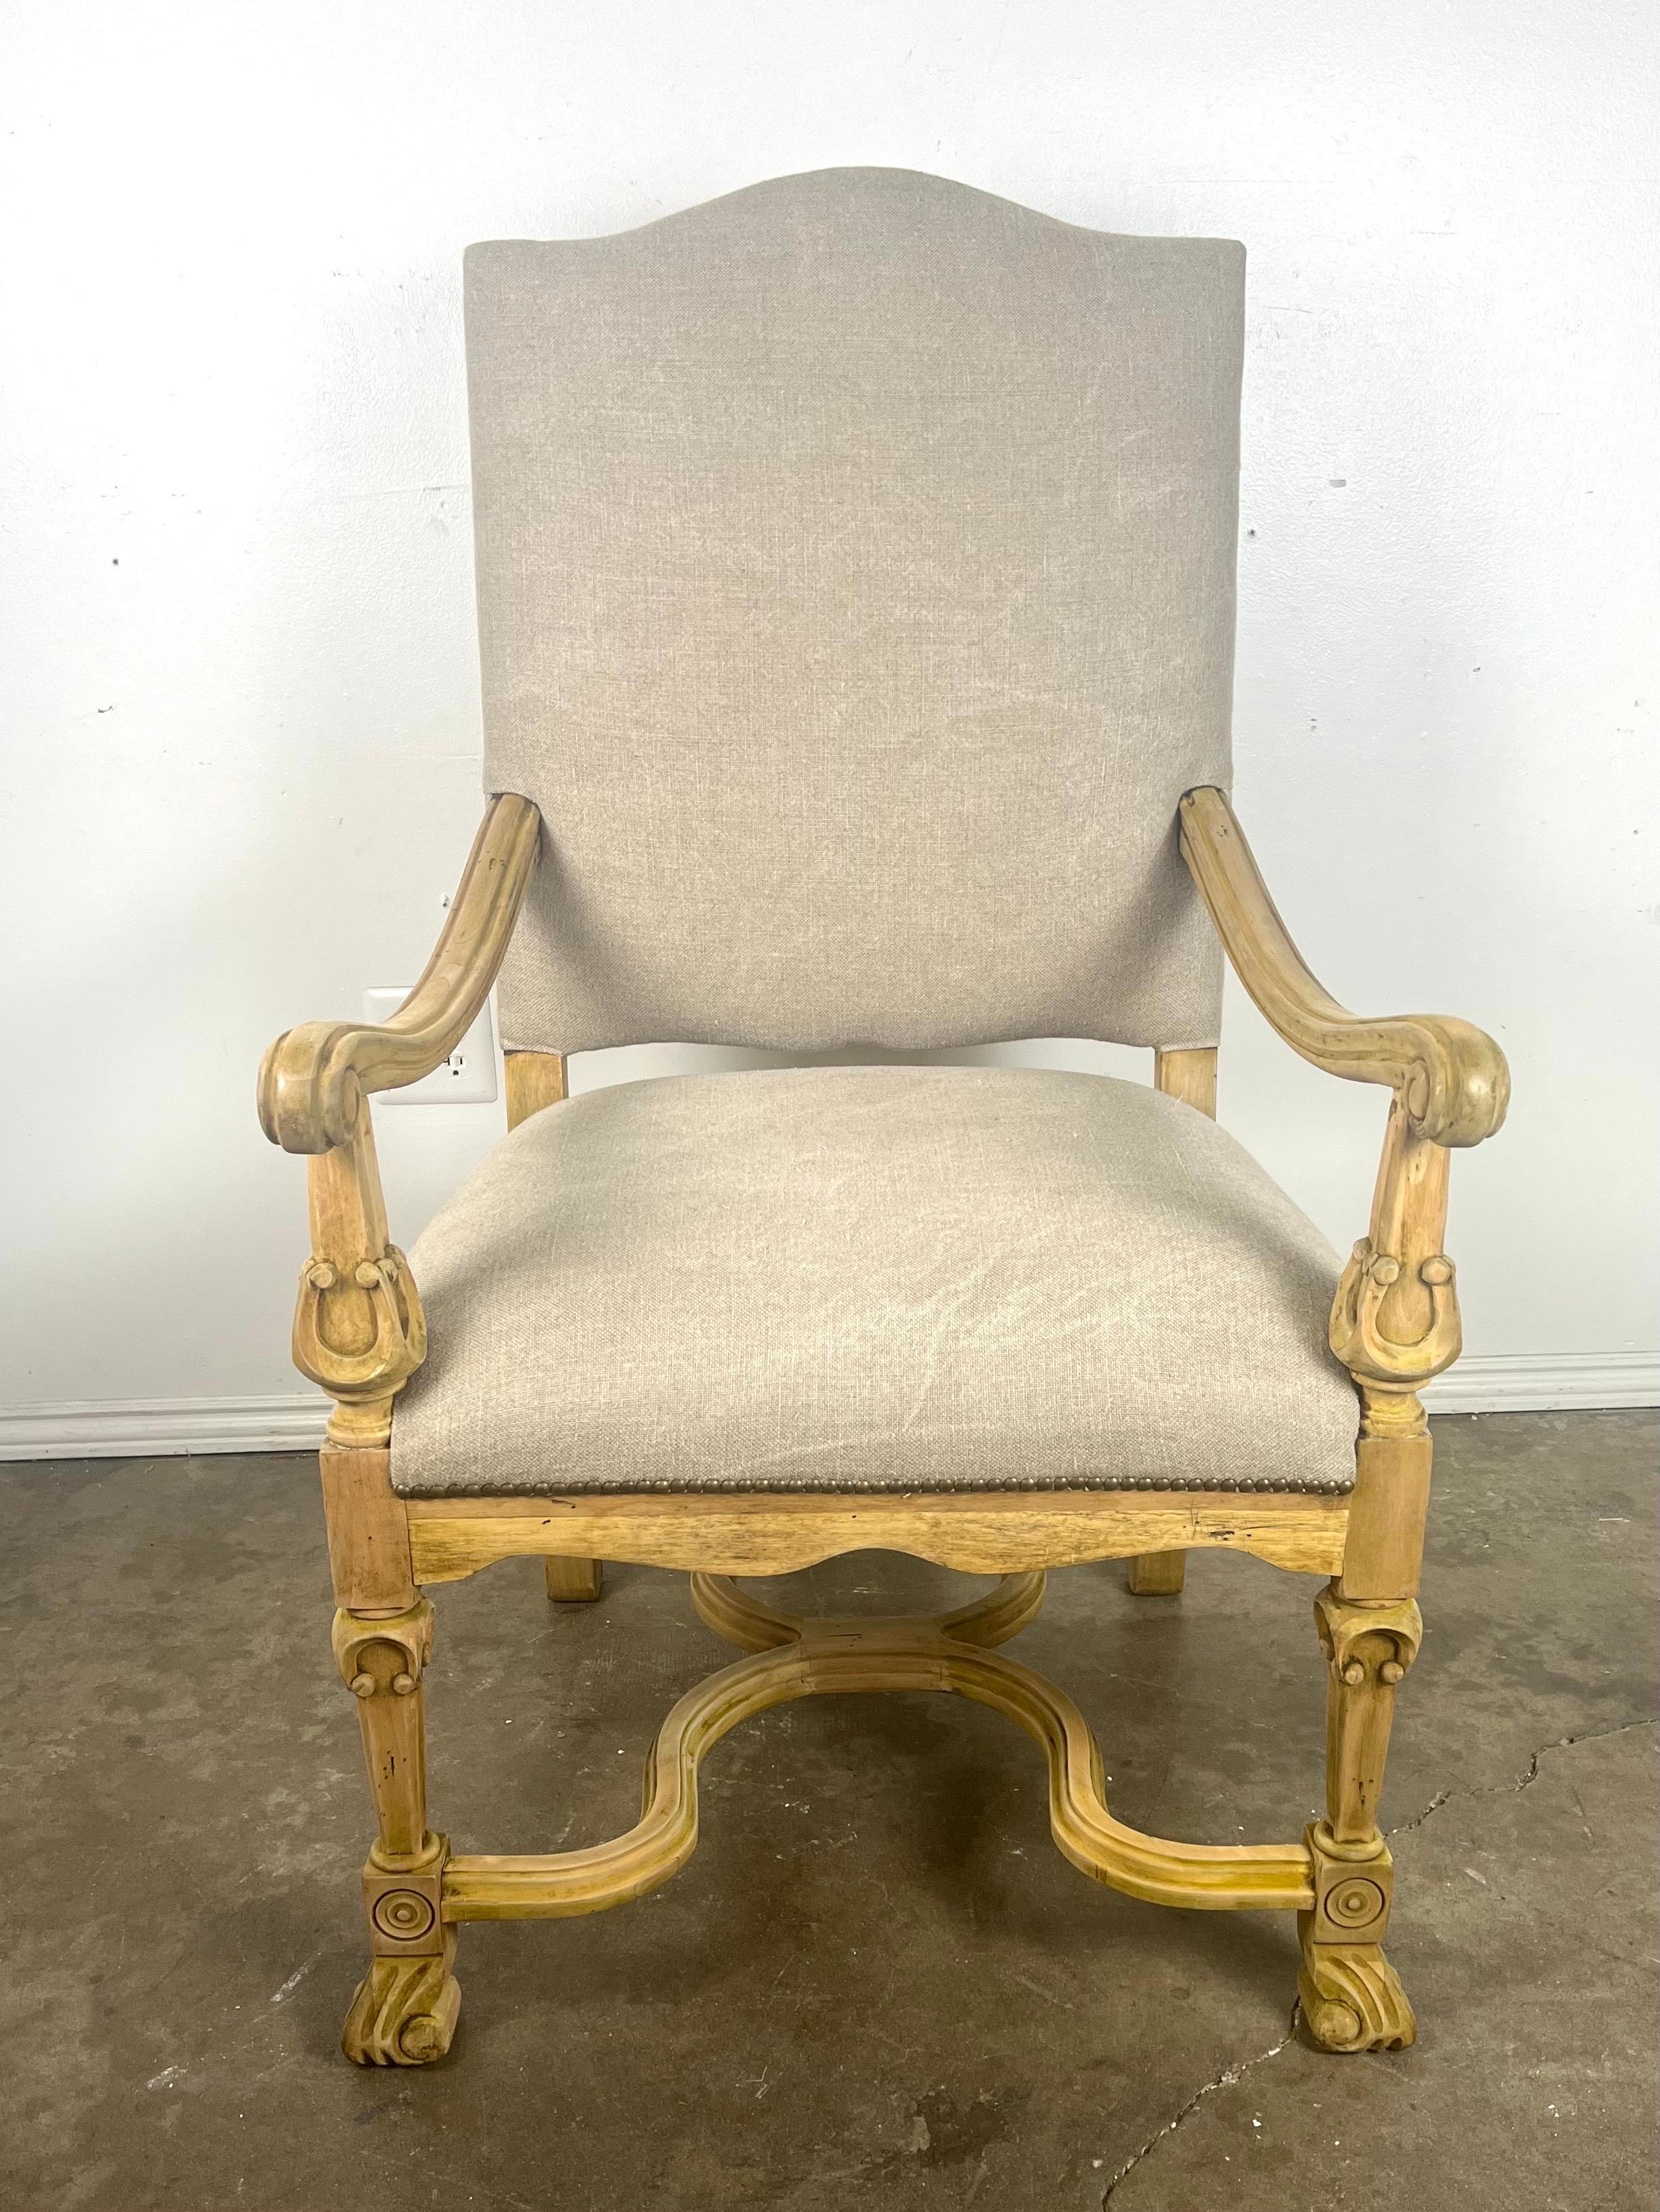 This set of 10 French Provincial dining chairs showcases a classic and refined design.  The eyebrow shaped tops of these chairs add a unique architectural element that brings soft curves and visual interest.  Upholstered in natural Belgian linen,